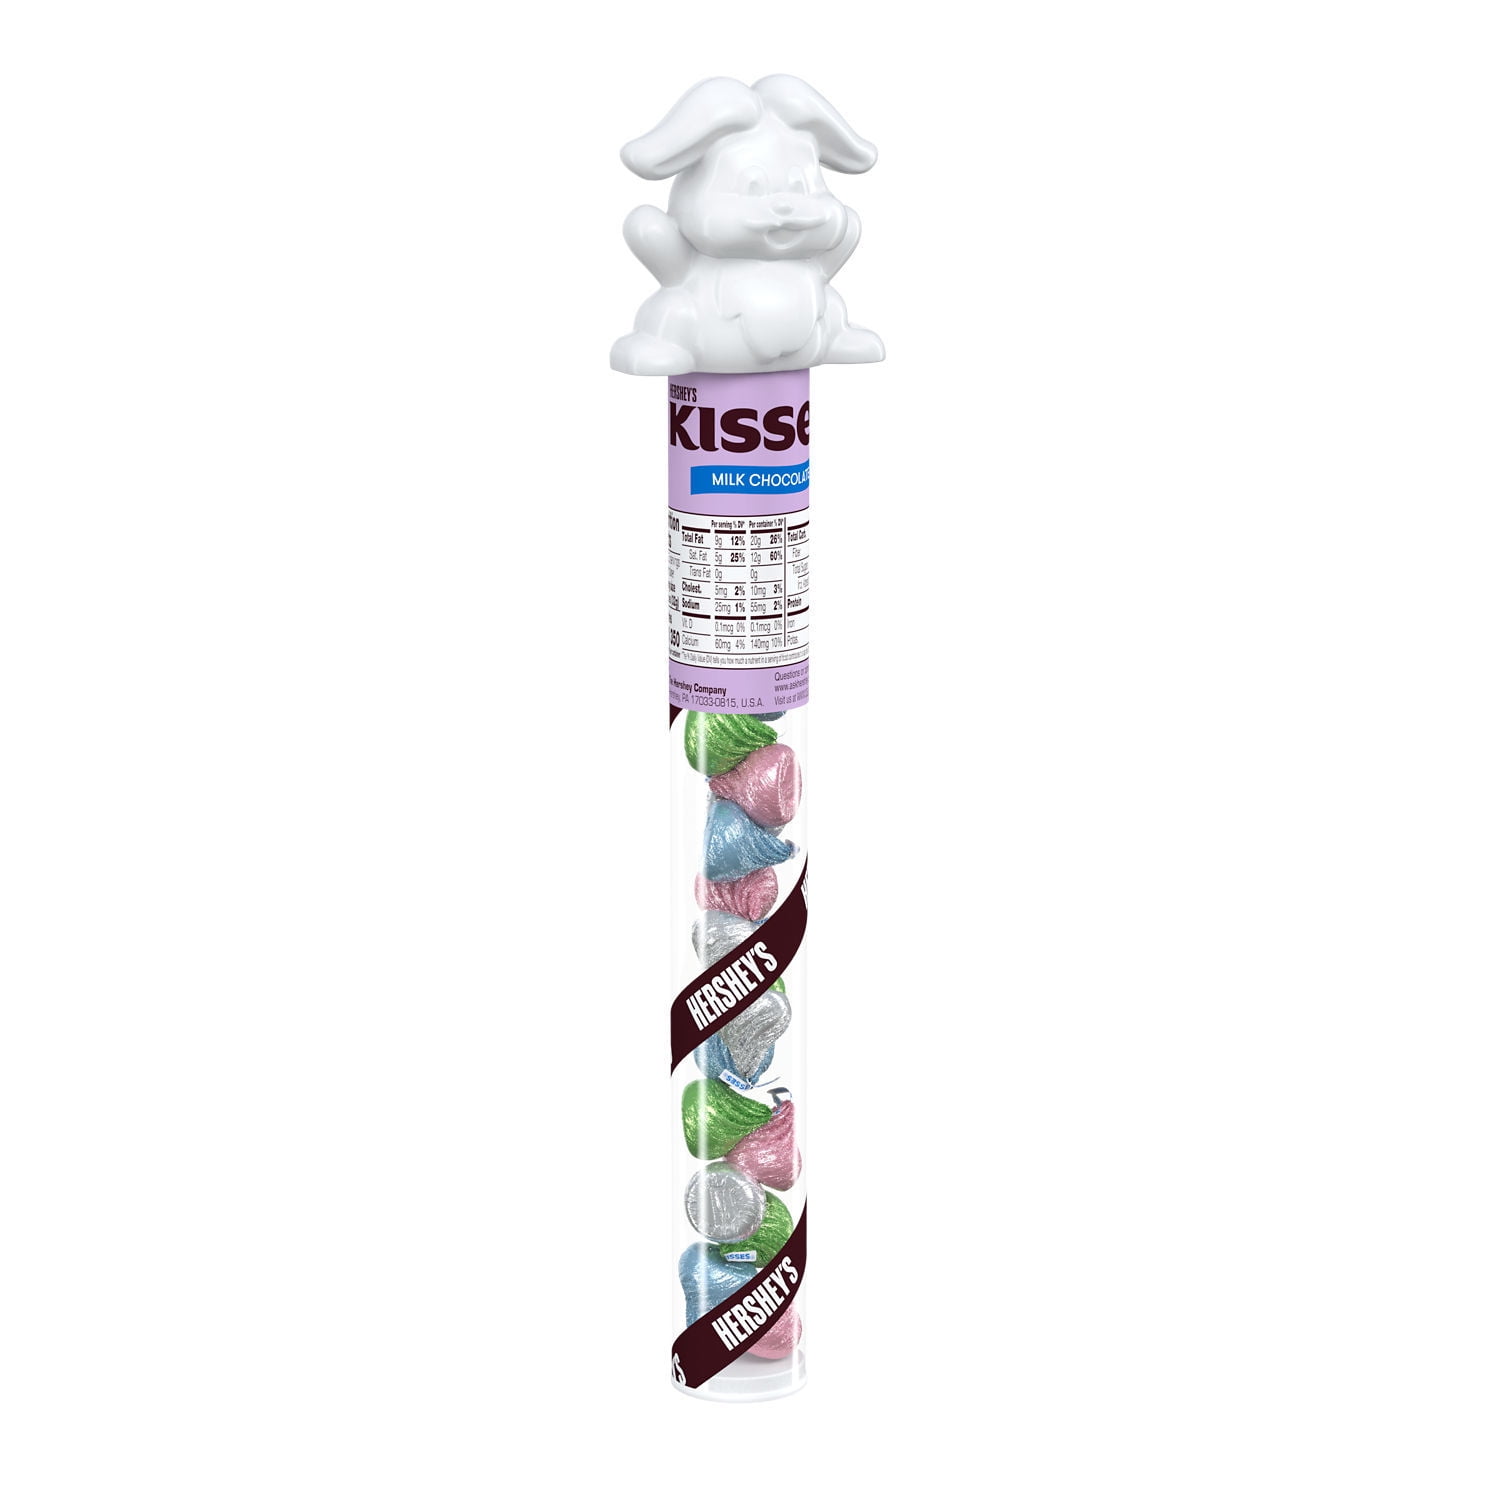 HERSHEY'S, KISSES Milk Chocolate Treats, Easter Candy, 2.56 oz, Filled Plastic Bunny Cane